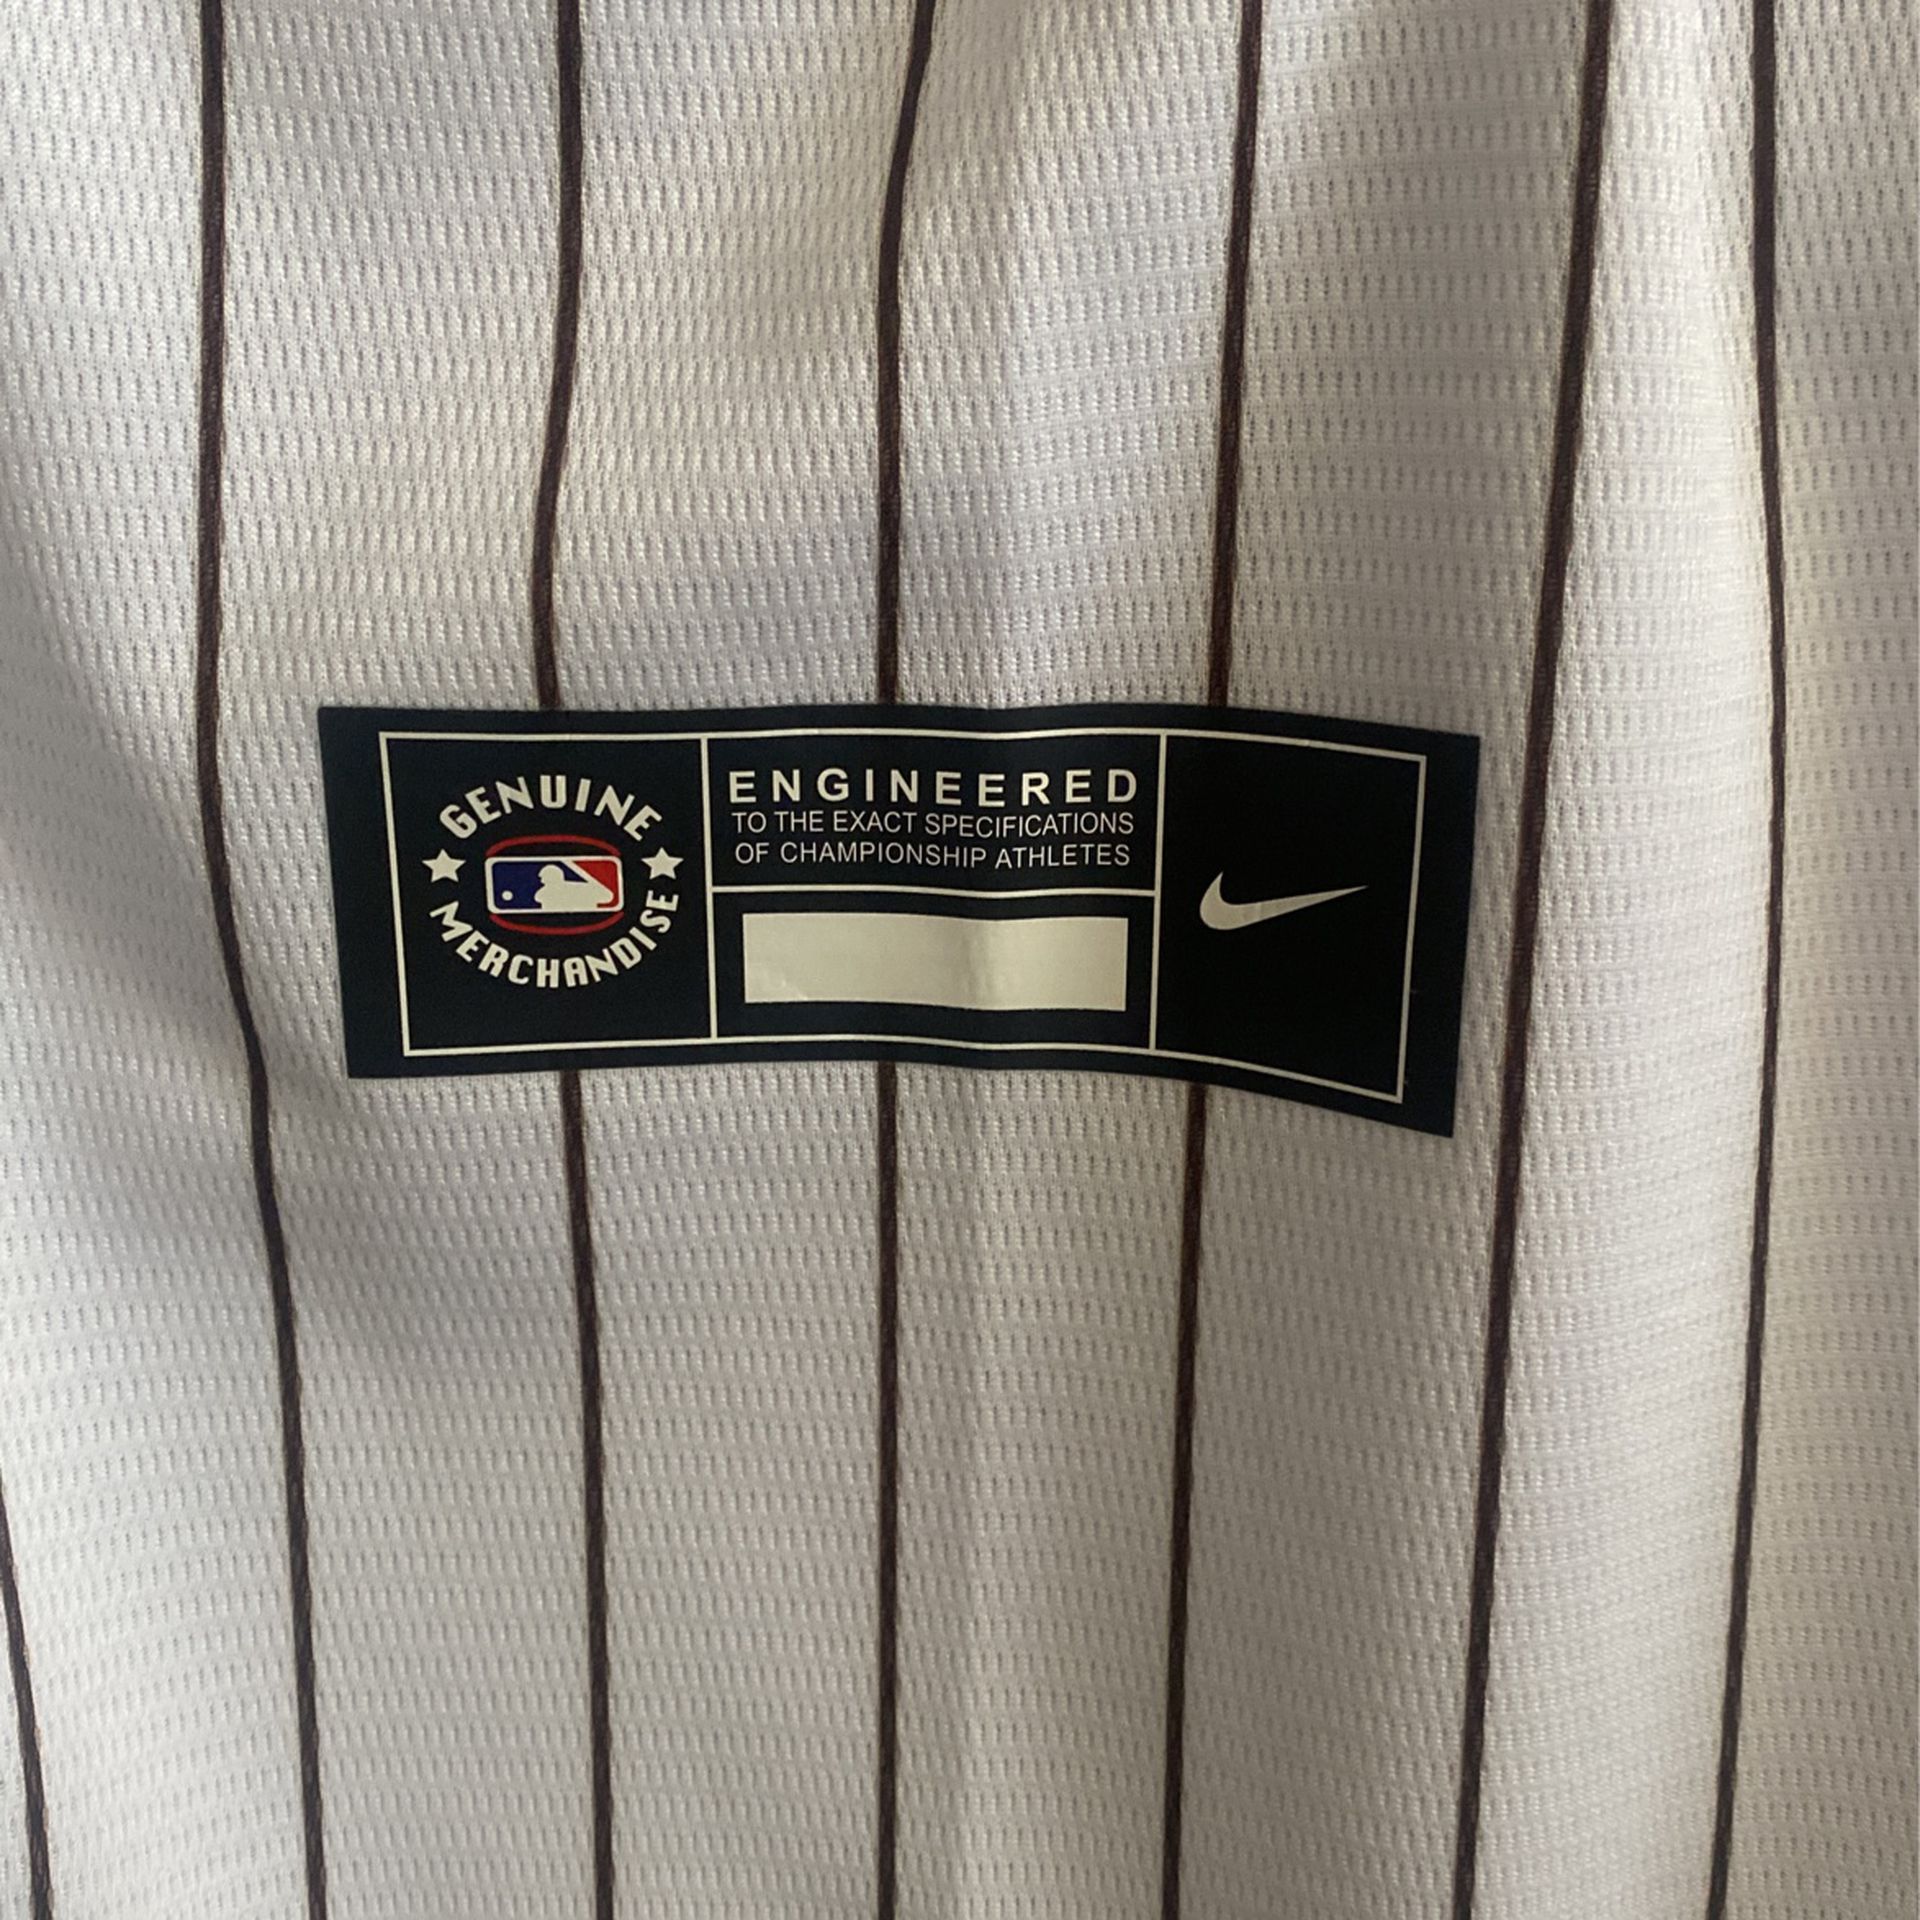 Joe Musgrove San Diego Padres City Connect Women's Jersey for Sale in  Bonita, CA - OfferUp